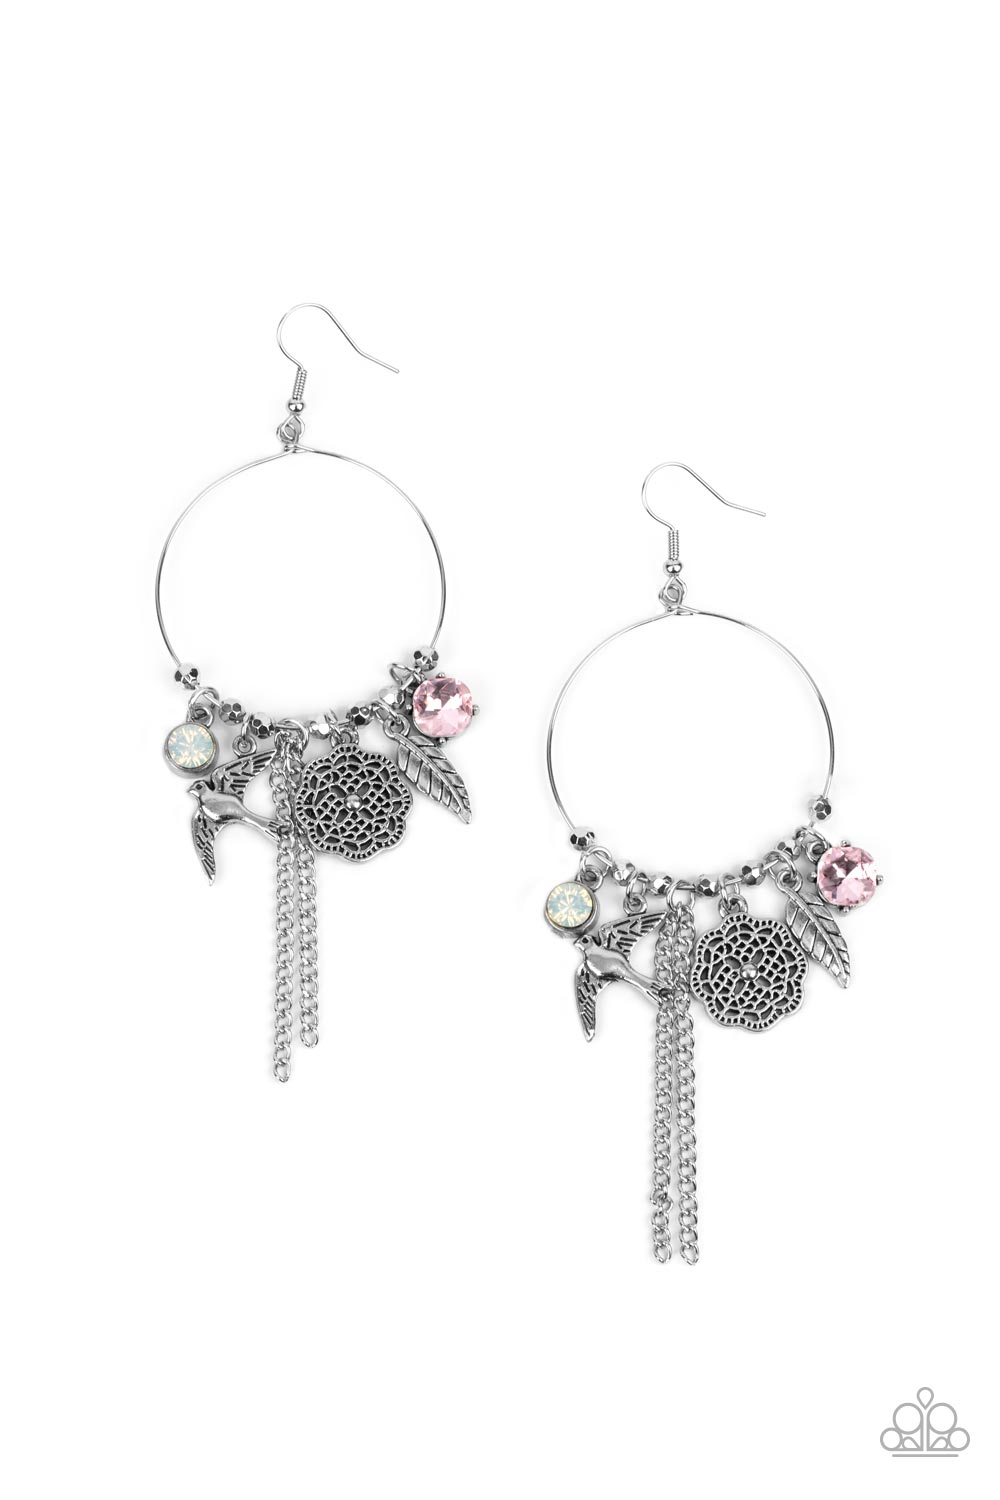 TWEET Dreams Pink Charm Earrings - Paparazzi Accessories- lightbox - CarasShop.com - $5 Jewelry by Cara Jewels